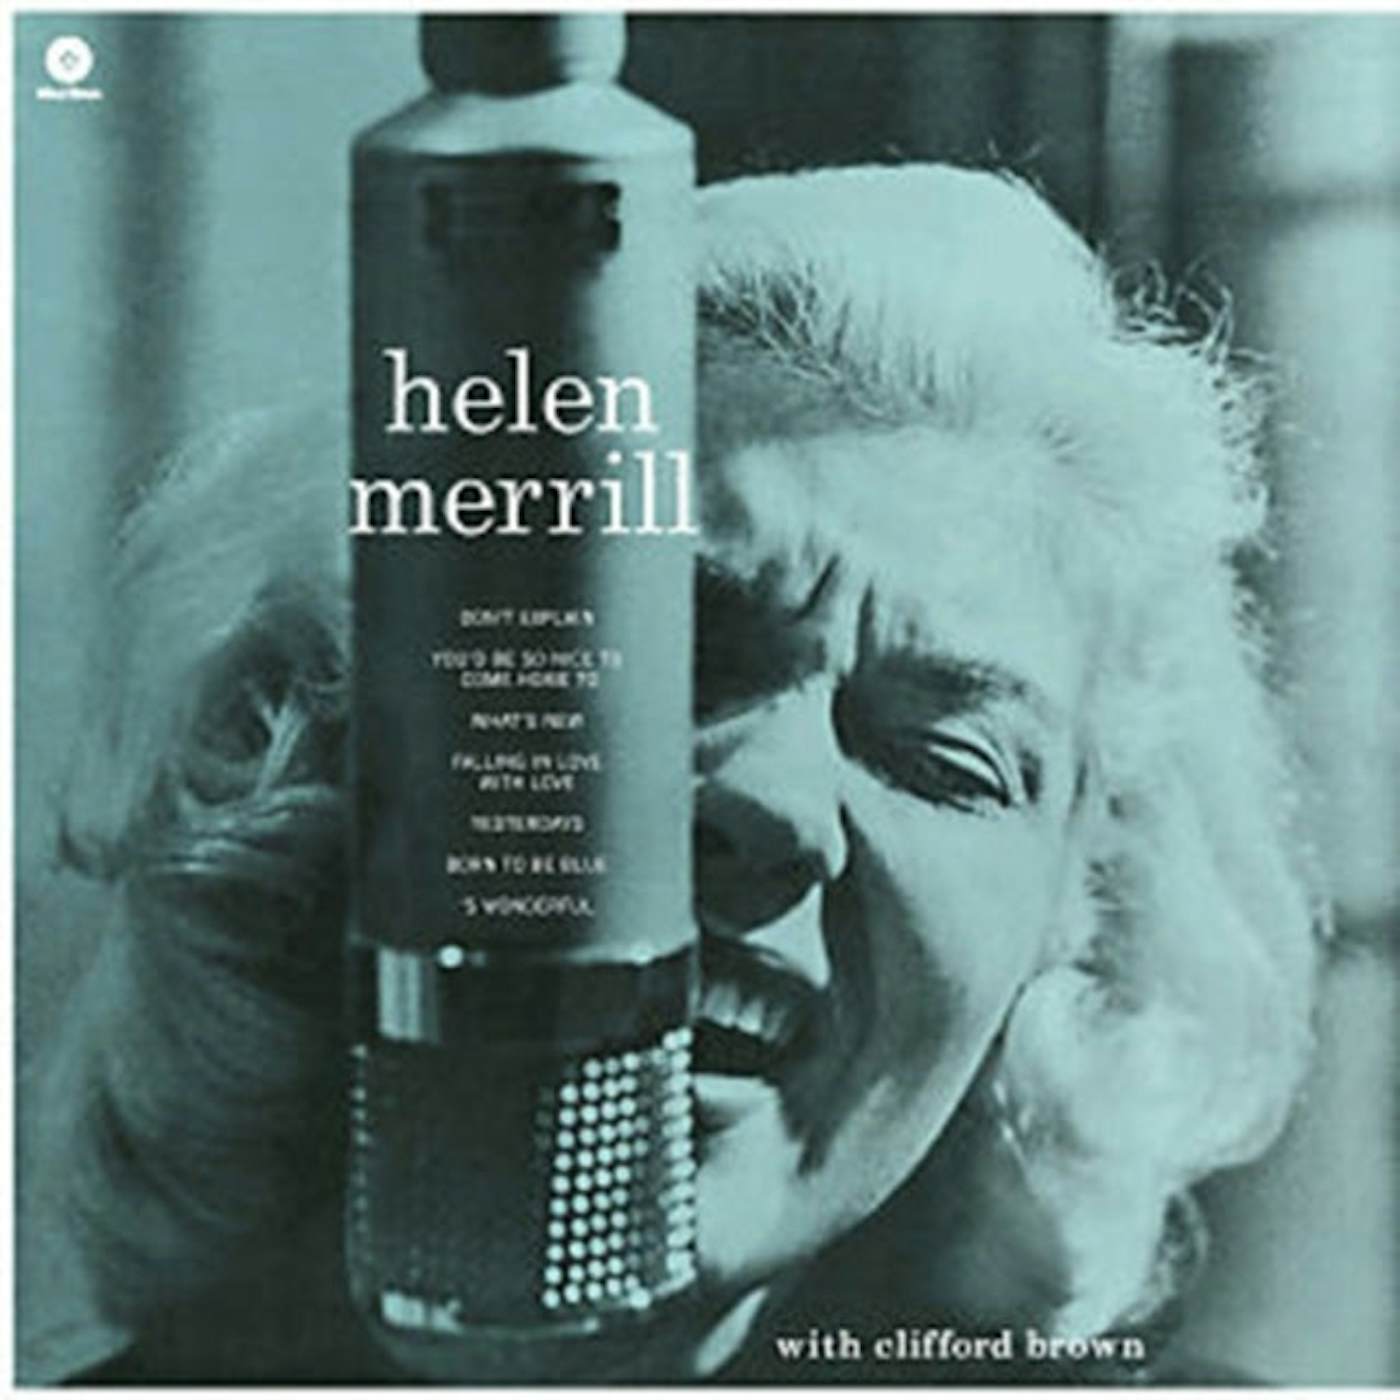 Helen Merrill LP Vinyl Record - With Clifford Brown